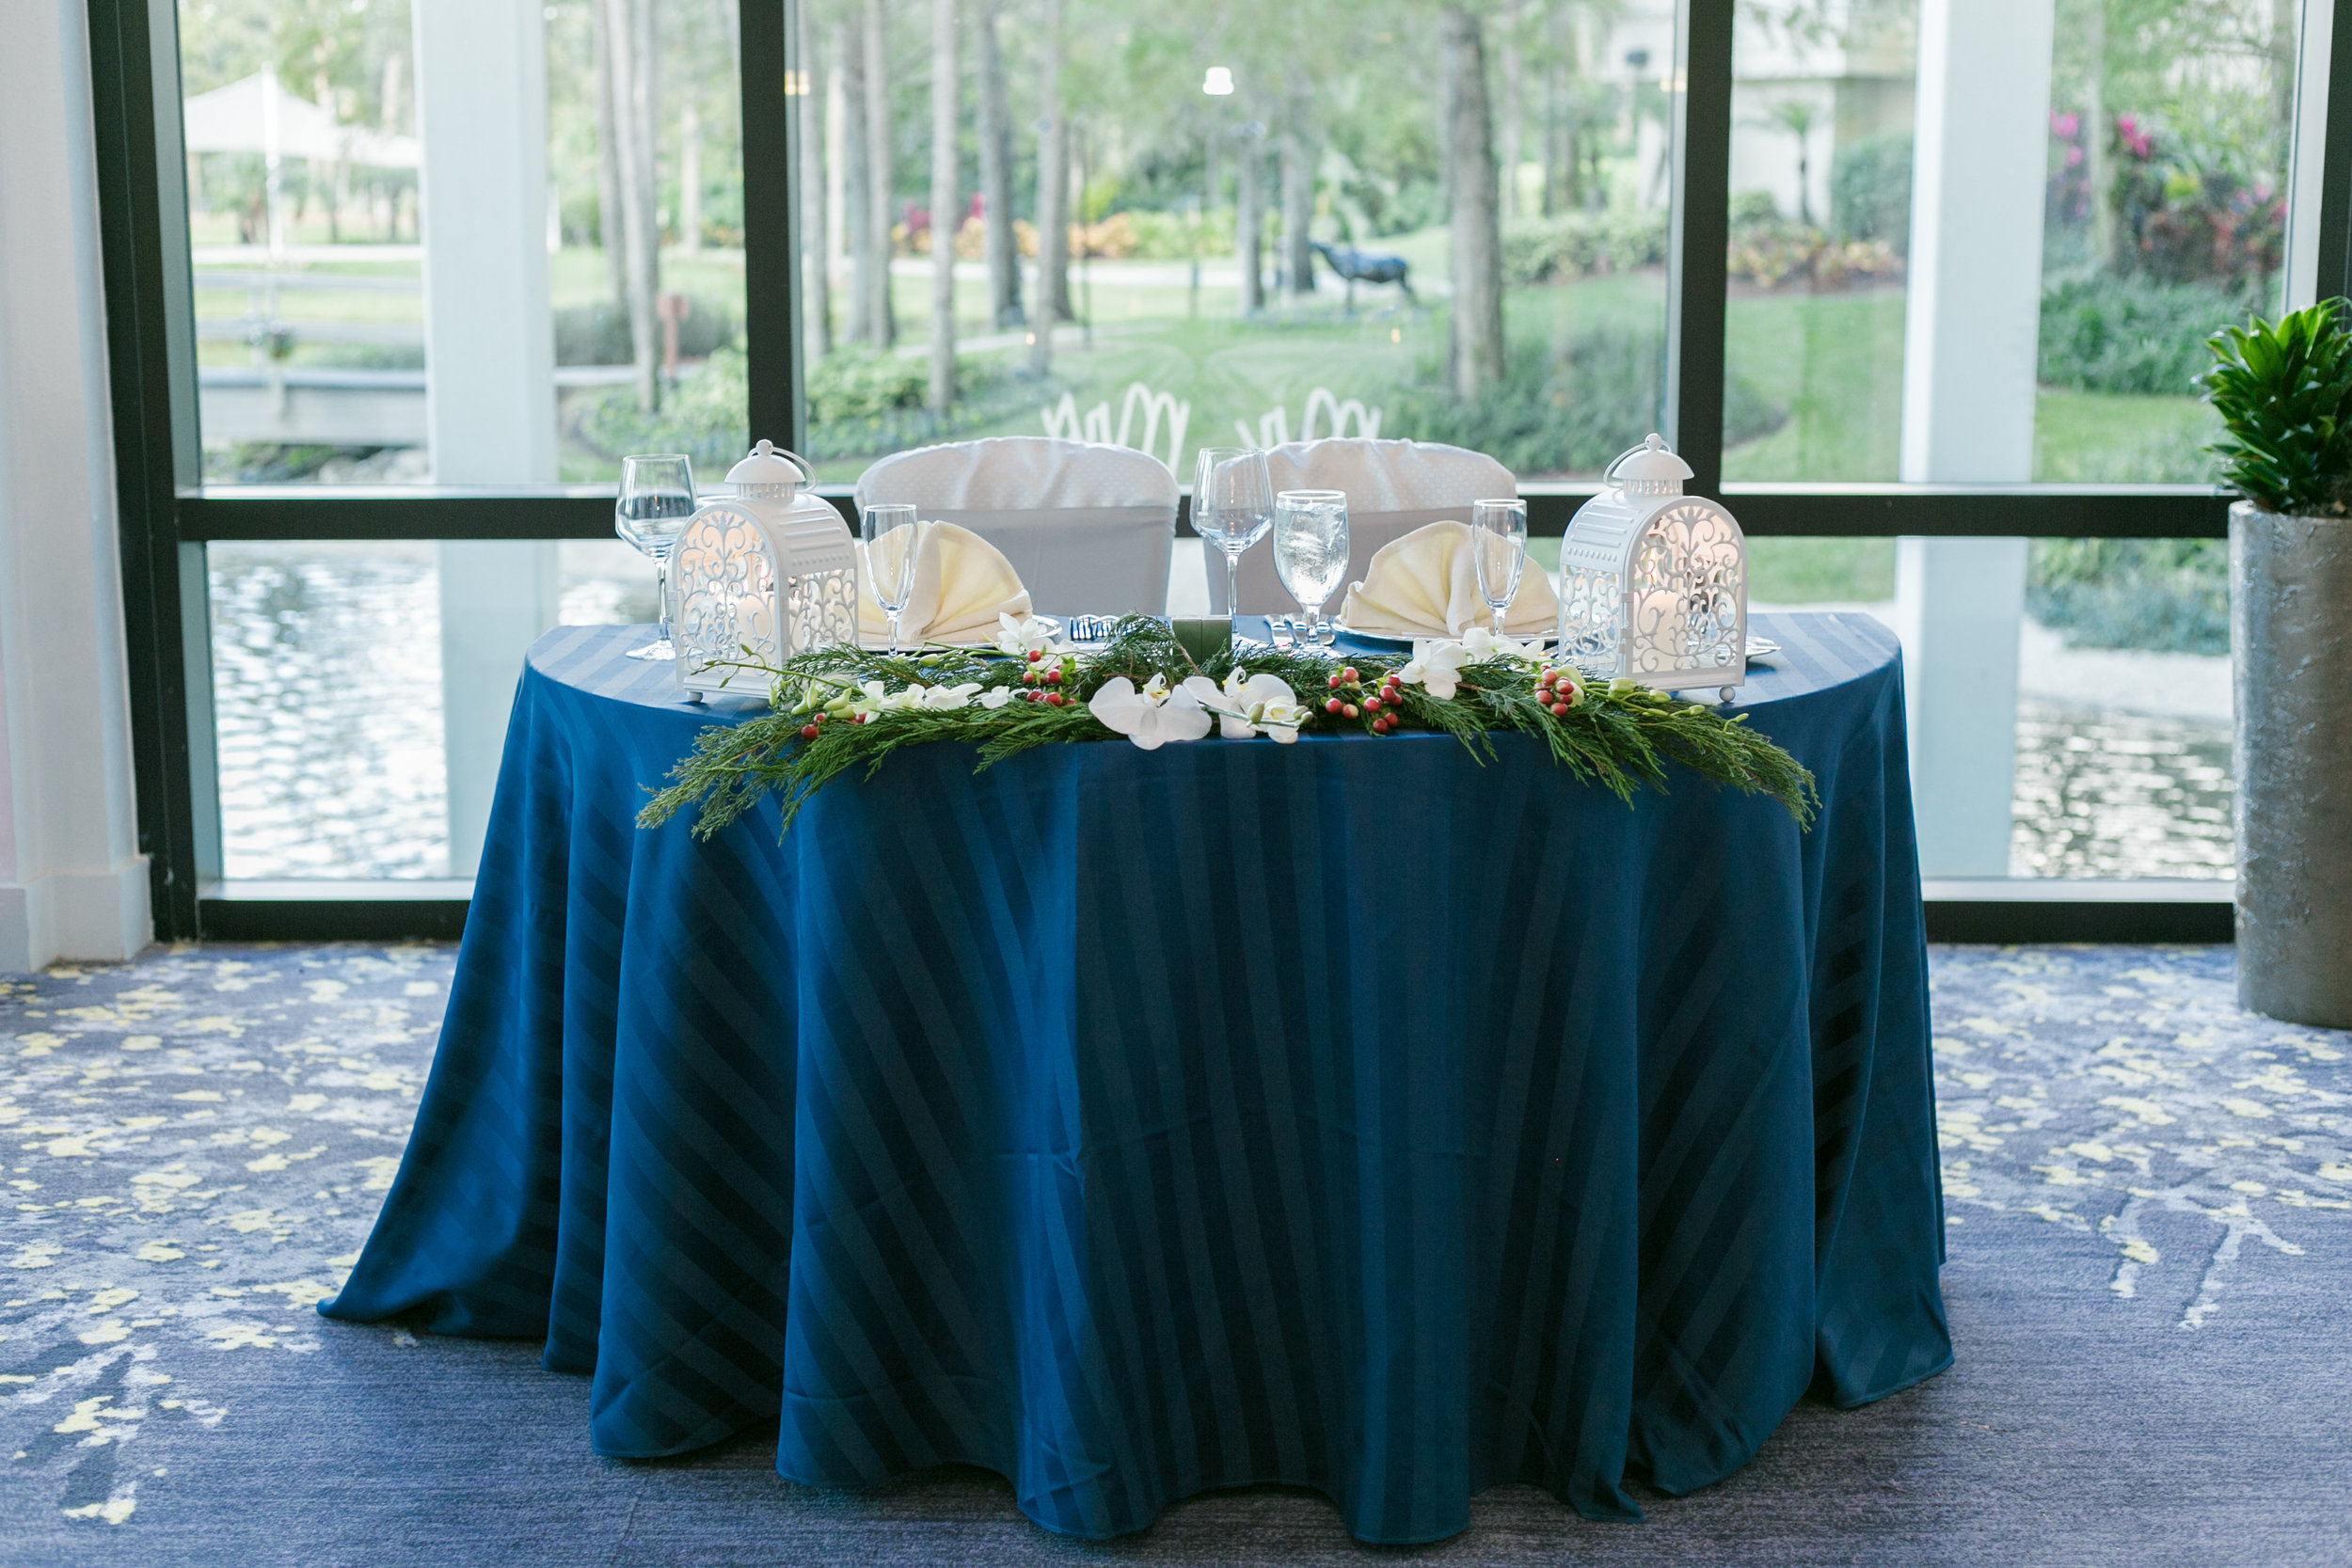 Bluegrass Chic - Sweetheart Table